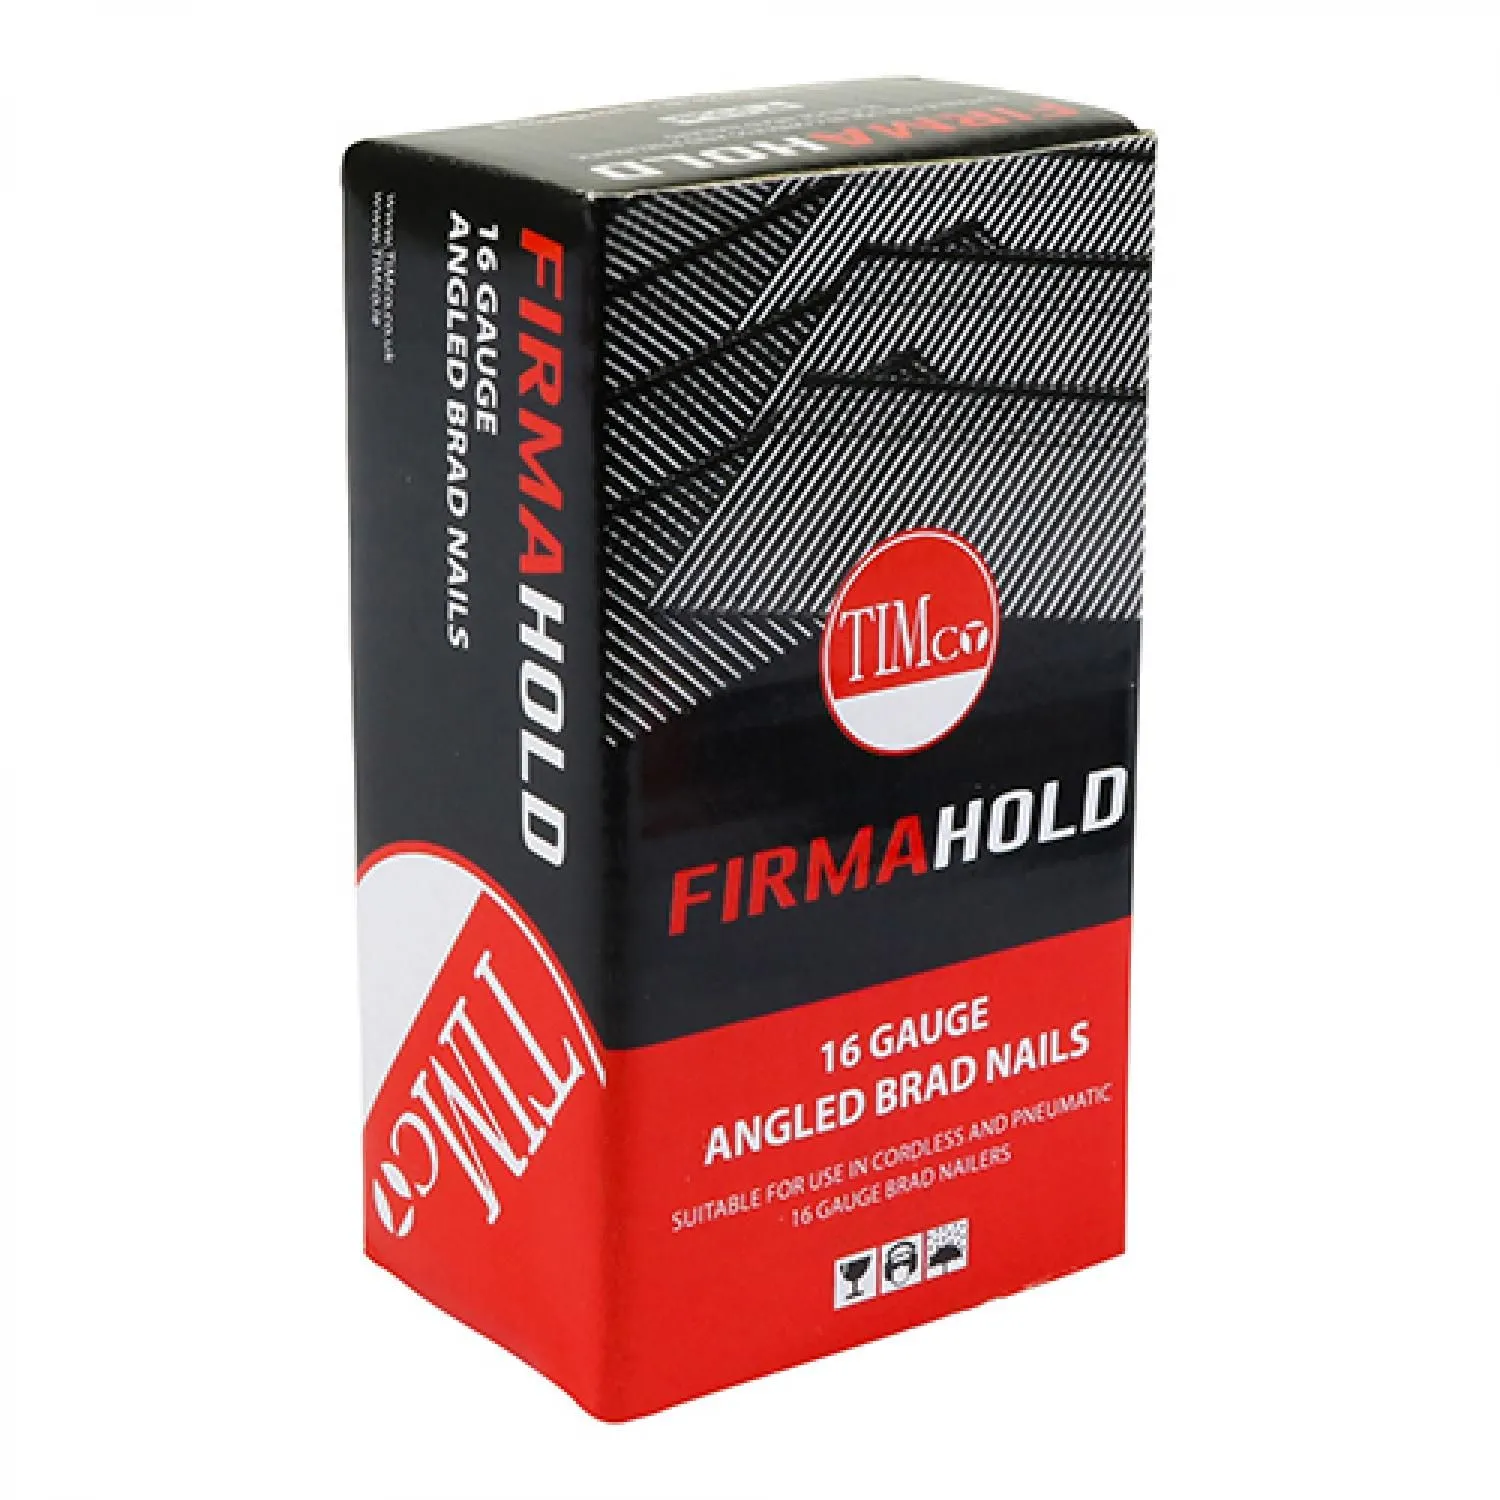 FirmaHold Angled Galv Brad Nails 16g x 38 (Box of 2000)